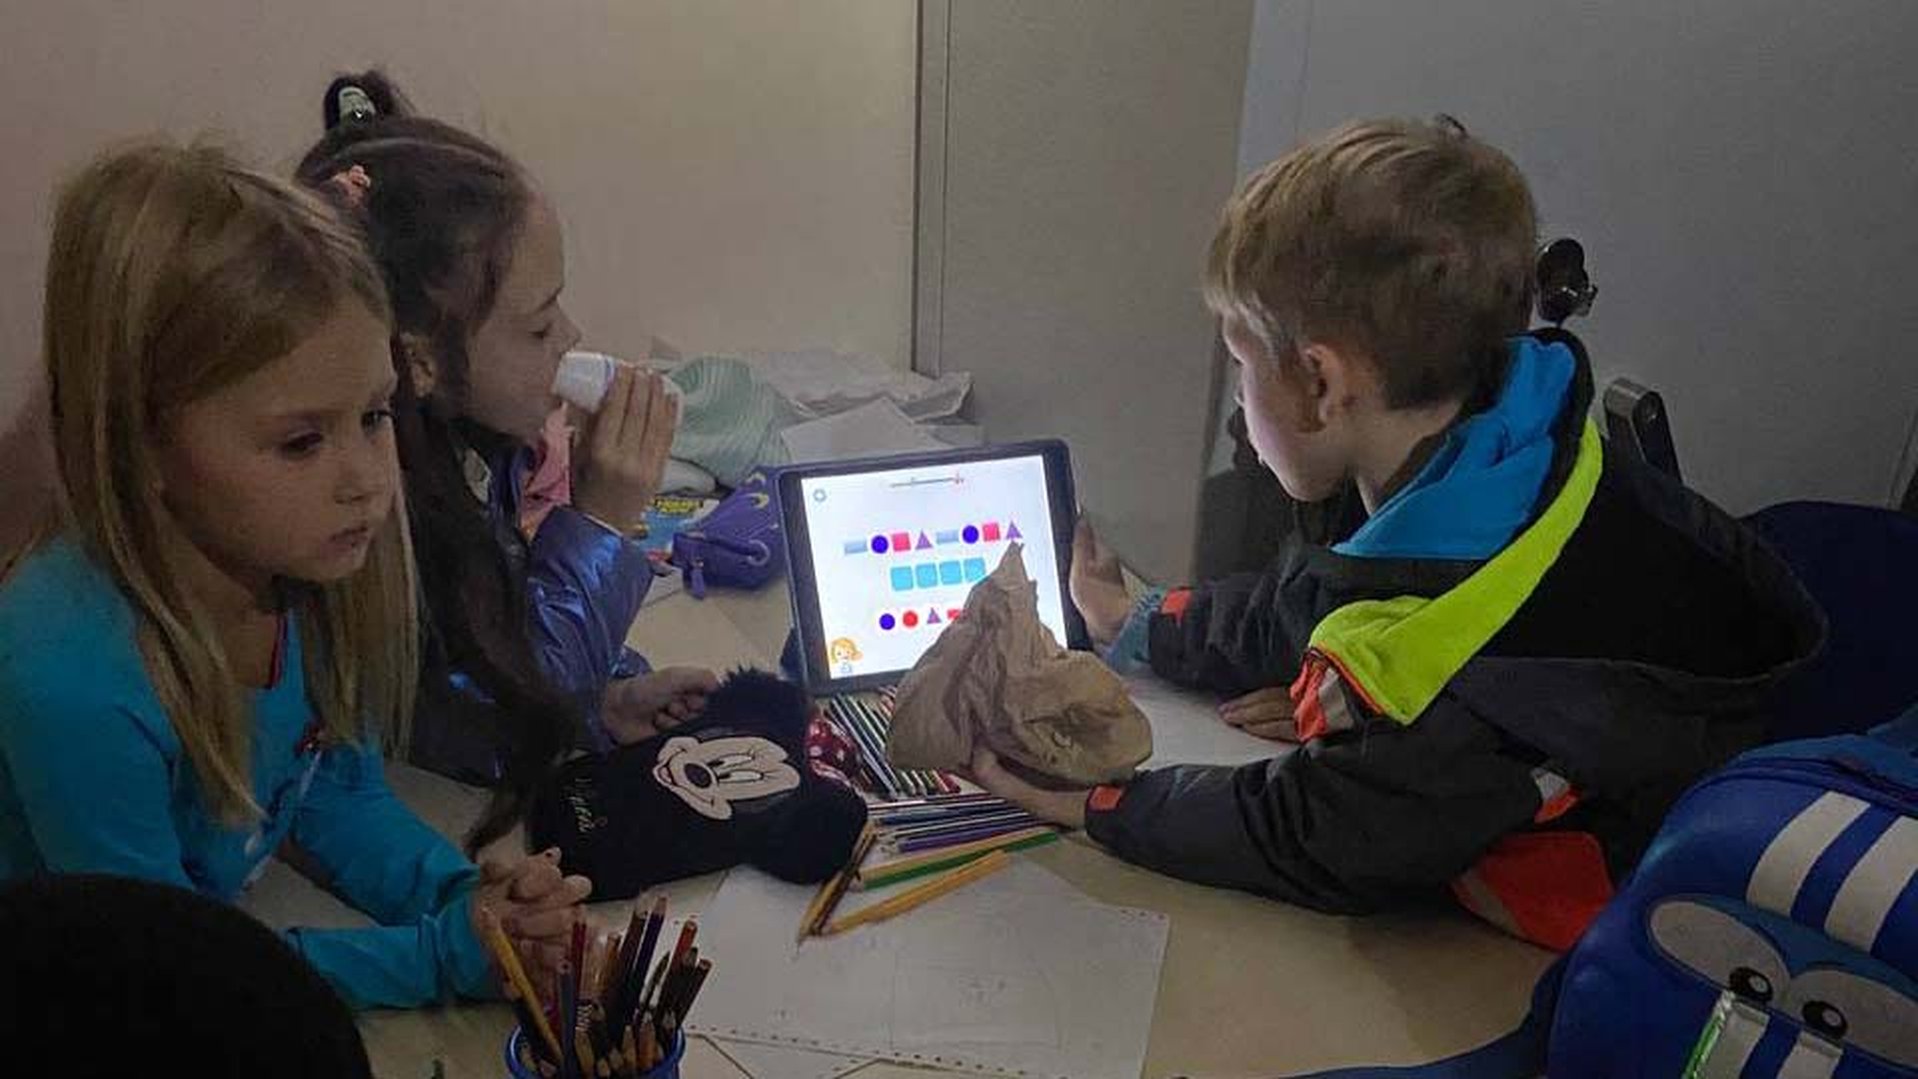 Three children in a bomb shelter in Ukraine using a tablet with Can't Wait to Learn, War Child's education app